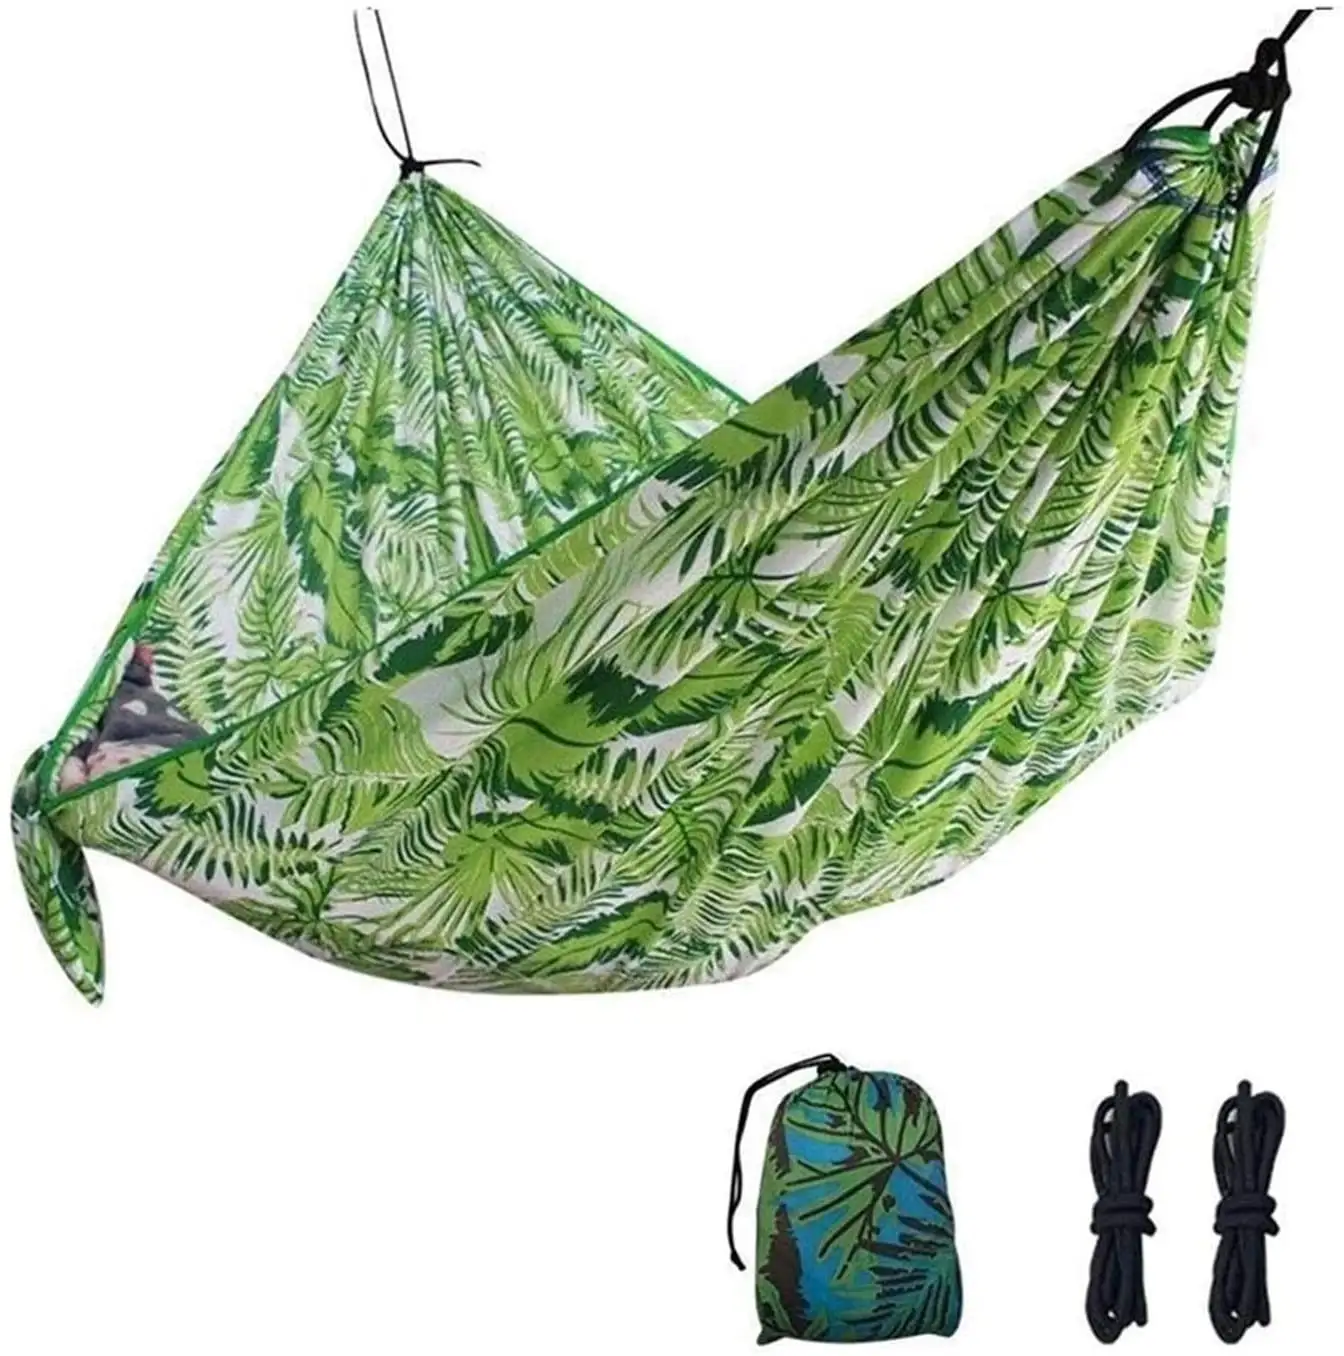 Woqi Full color Printed Outdoor Portable Camping Swing Hammock with carry bag